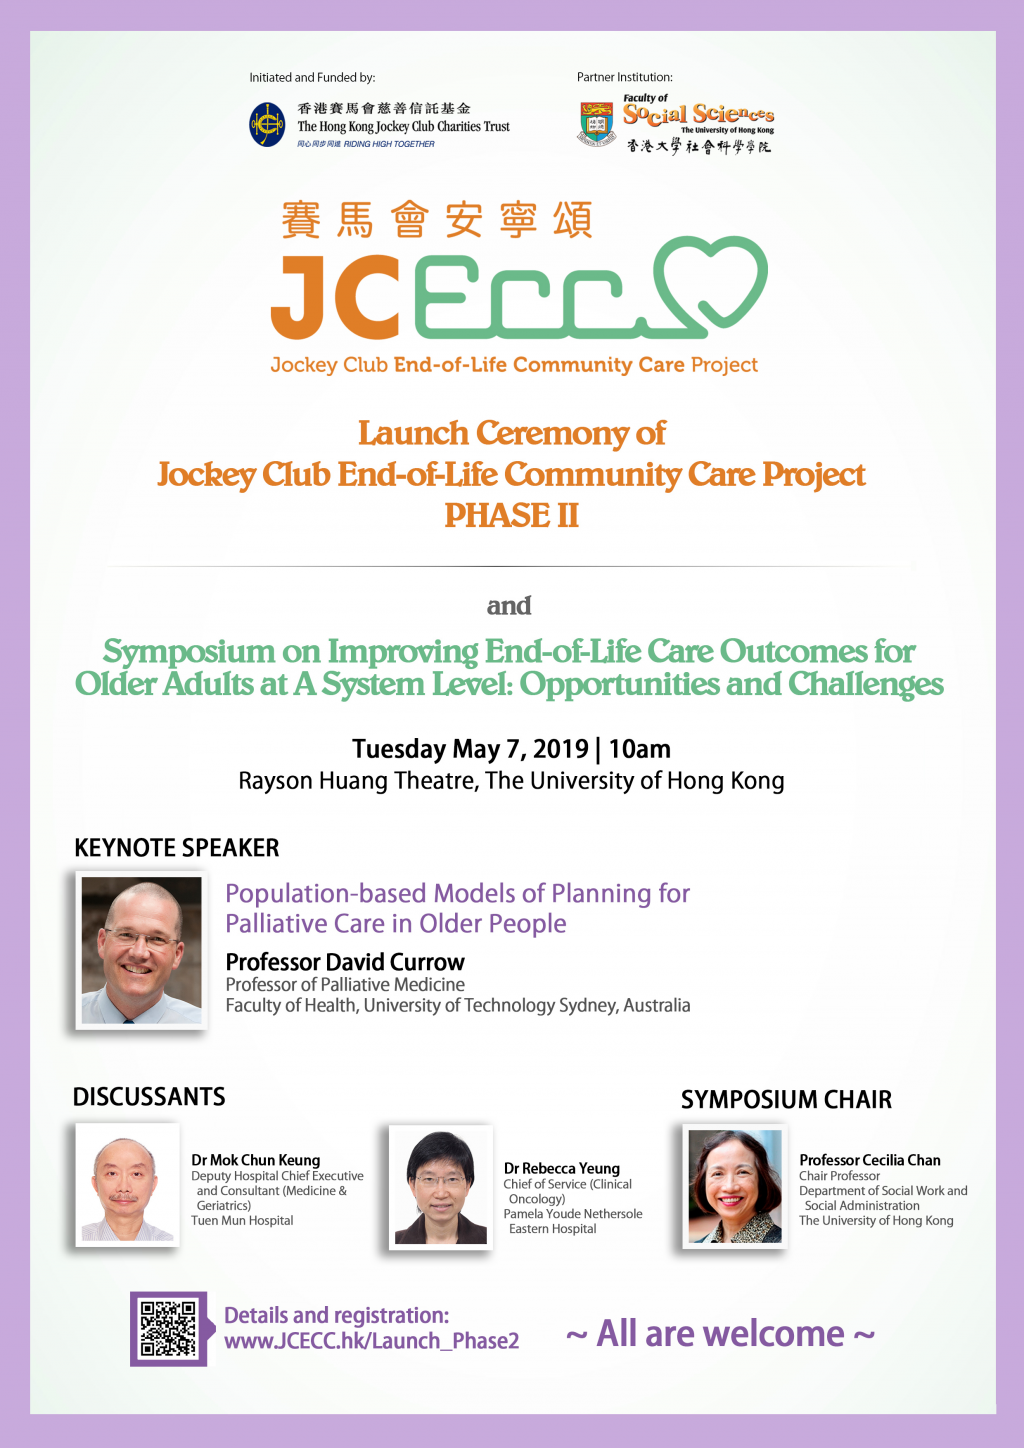 Launch Ceremony of Jockey Club End-of-Life Community Care Project Phase II